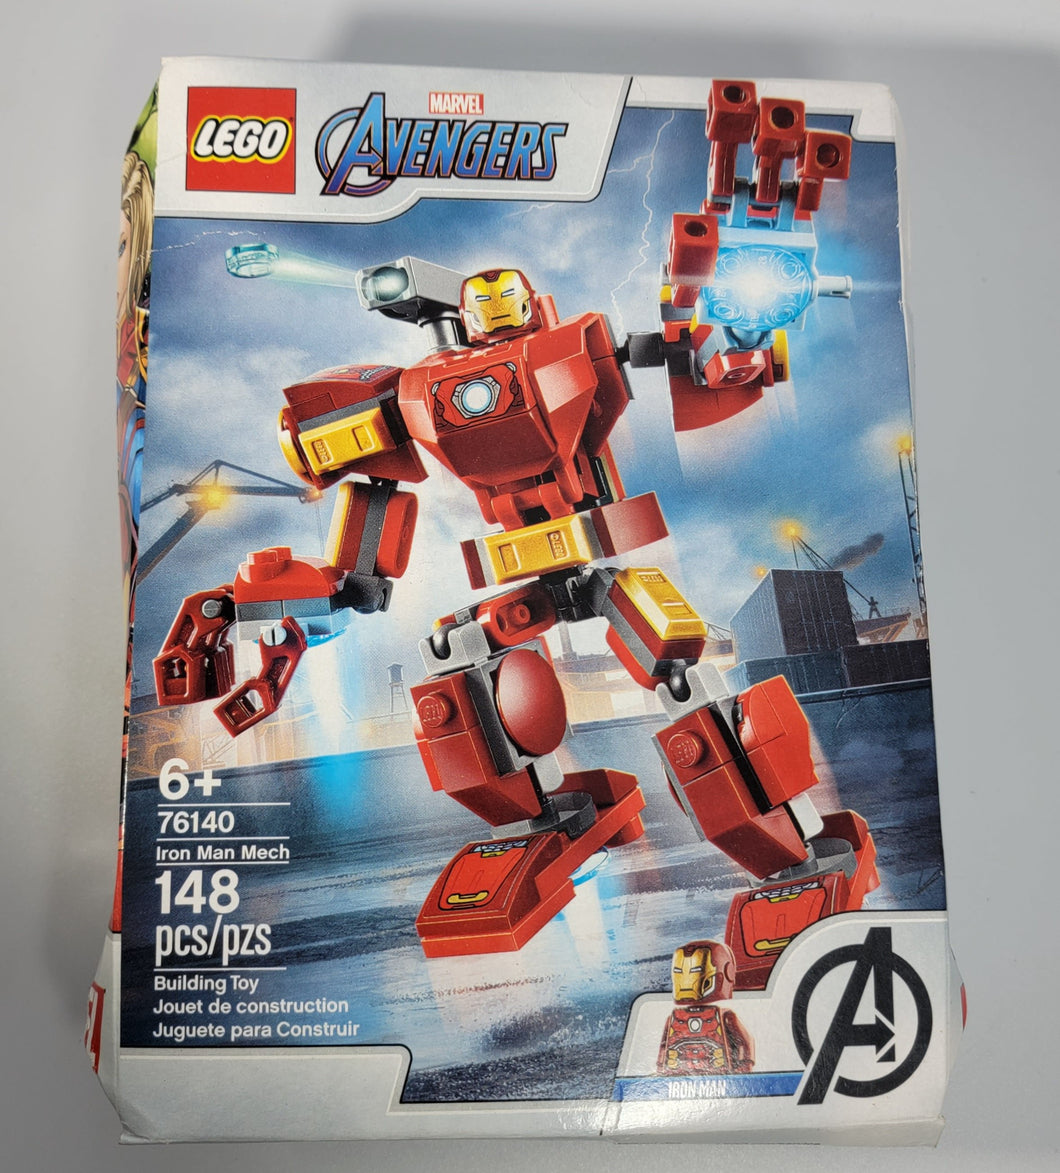 LEGO Marvel Avengers Iron Man Mech 76140, Building Toy with Iron Man Mech and Minifigure (148 Pieces)